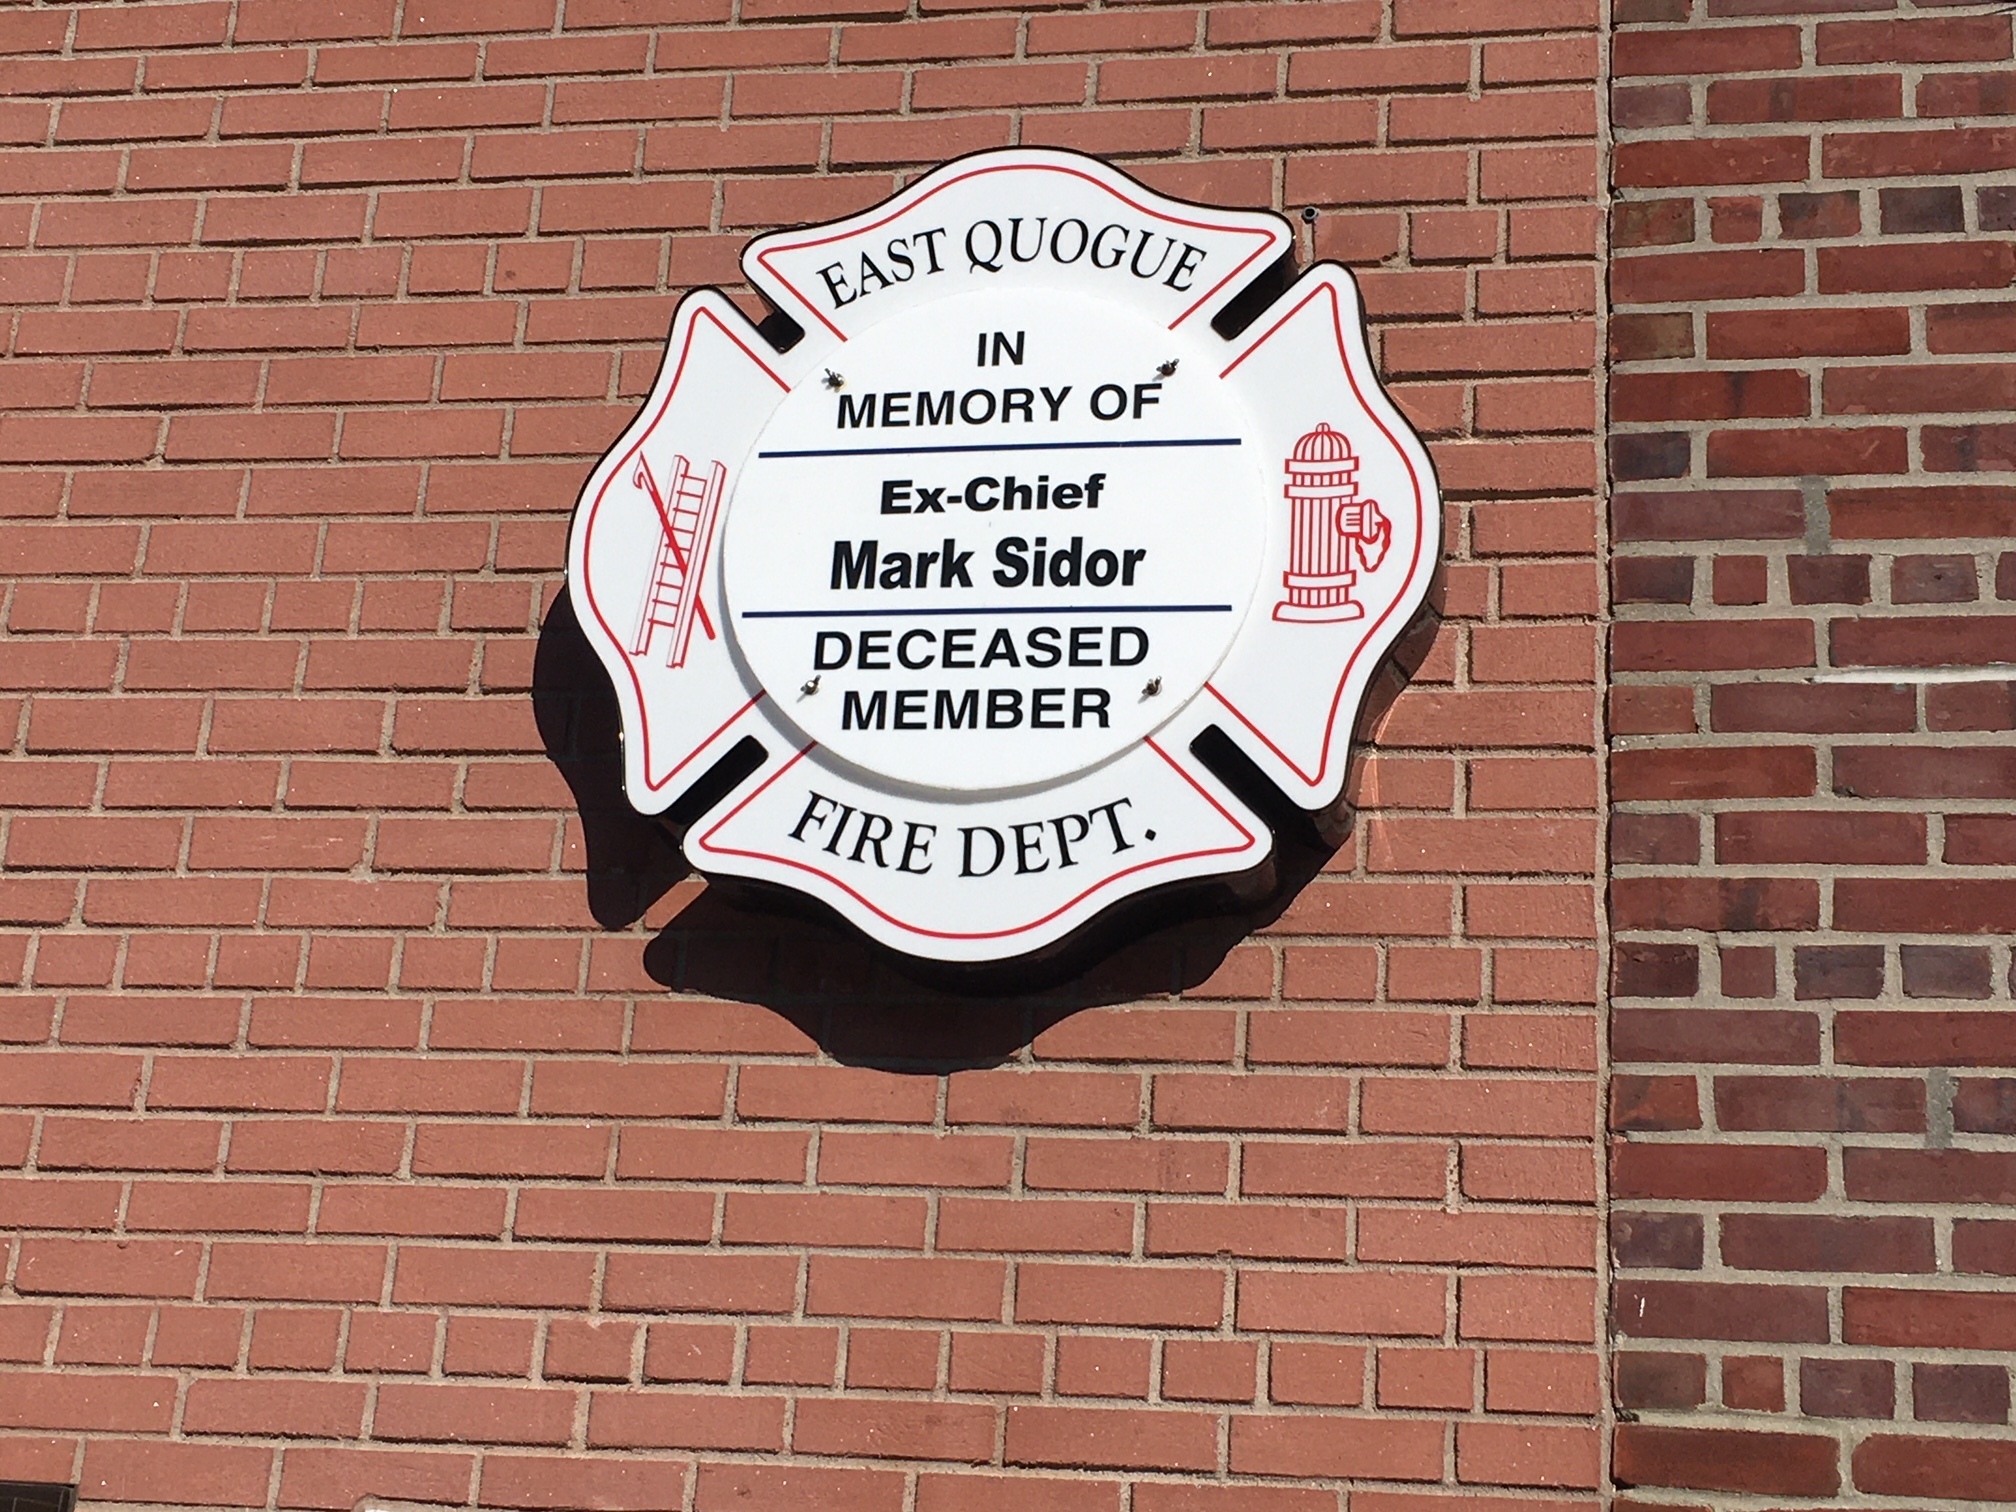 The placque marks Mark Sidor's service with the East Quogue Fire Department.  LORI SIDOR